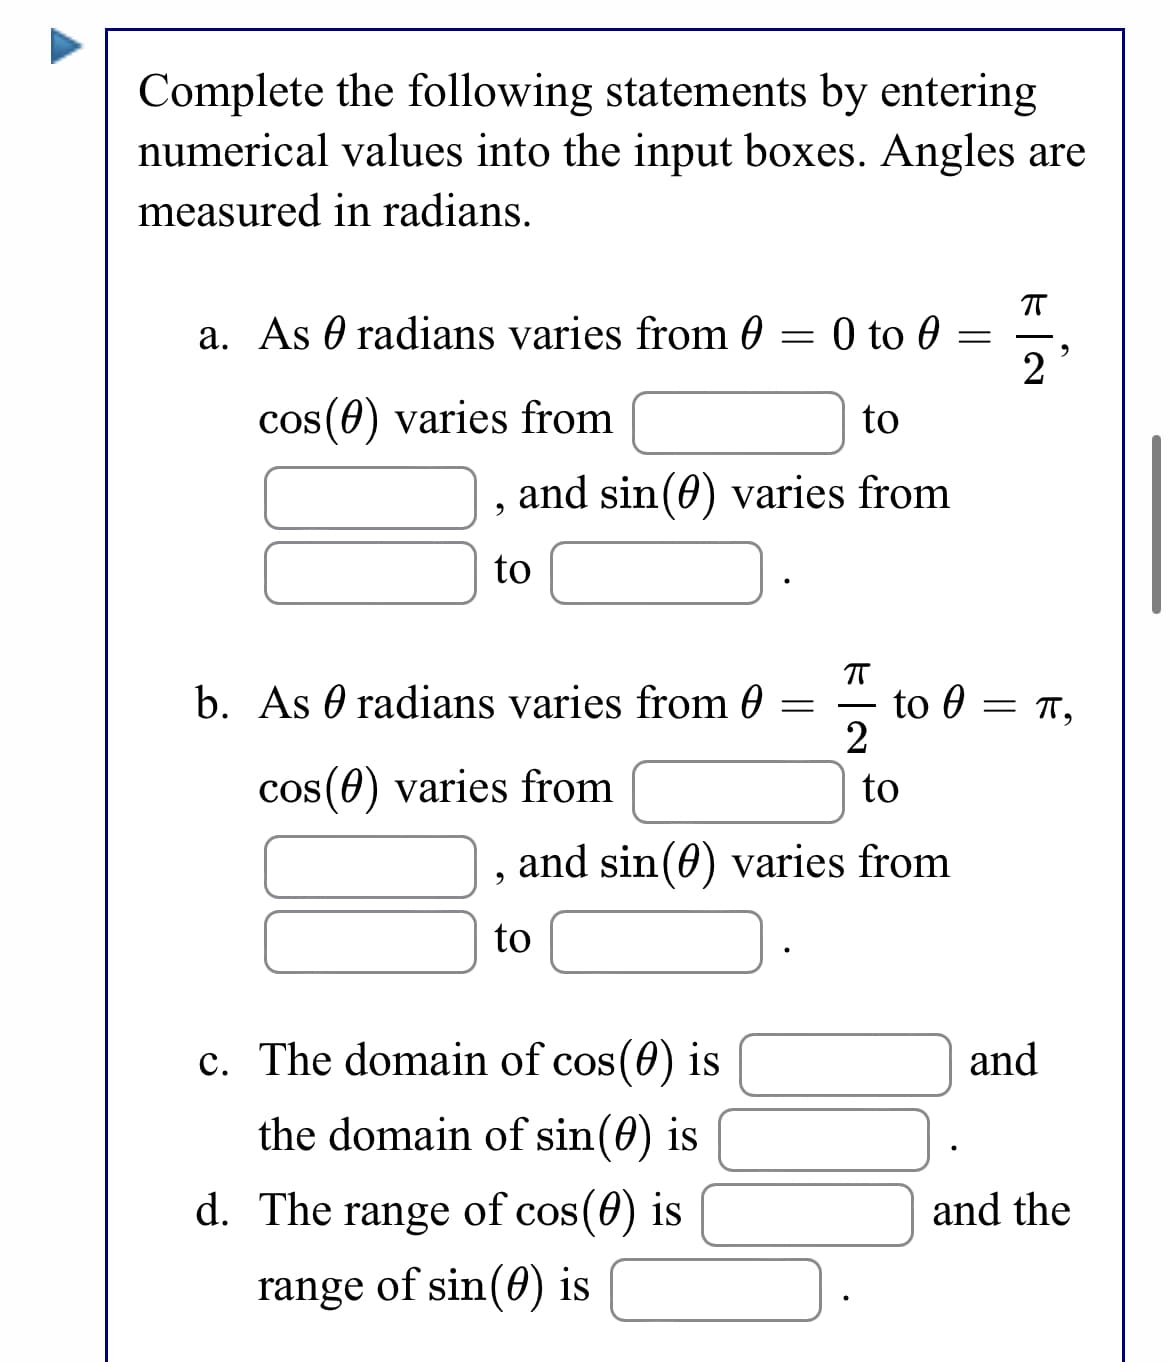 Complete the following statements by entering
numerical values into the input boxes. Angles are
measured in radians.
a. As 0 radians varies from 0 = 0 to 0
2
cos(0) varies from
to
and sin(0) varies from
to
b. As 0 radians varies from 0 =
to 0
= 1,
cos(0) varies from
to
and sin(0) varies from
to
c. The domain of cos(0) is
and
the domain of sin(0) is
d. The range of cos(0) is
and the
range of sin(0) is
